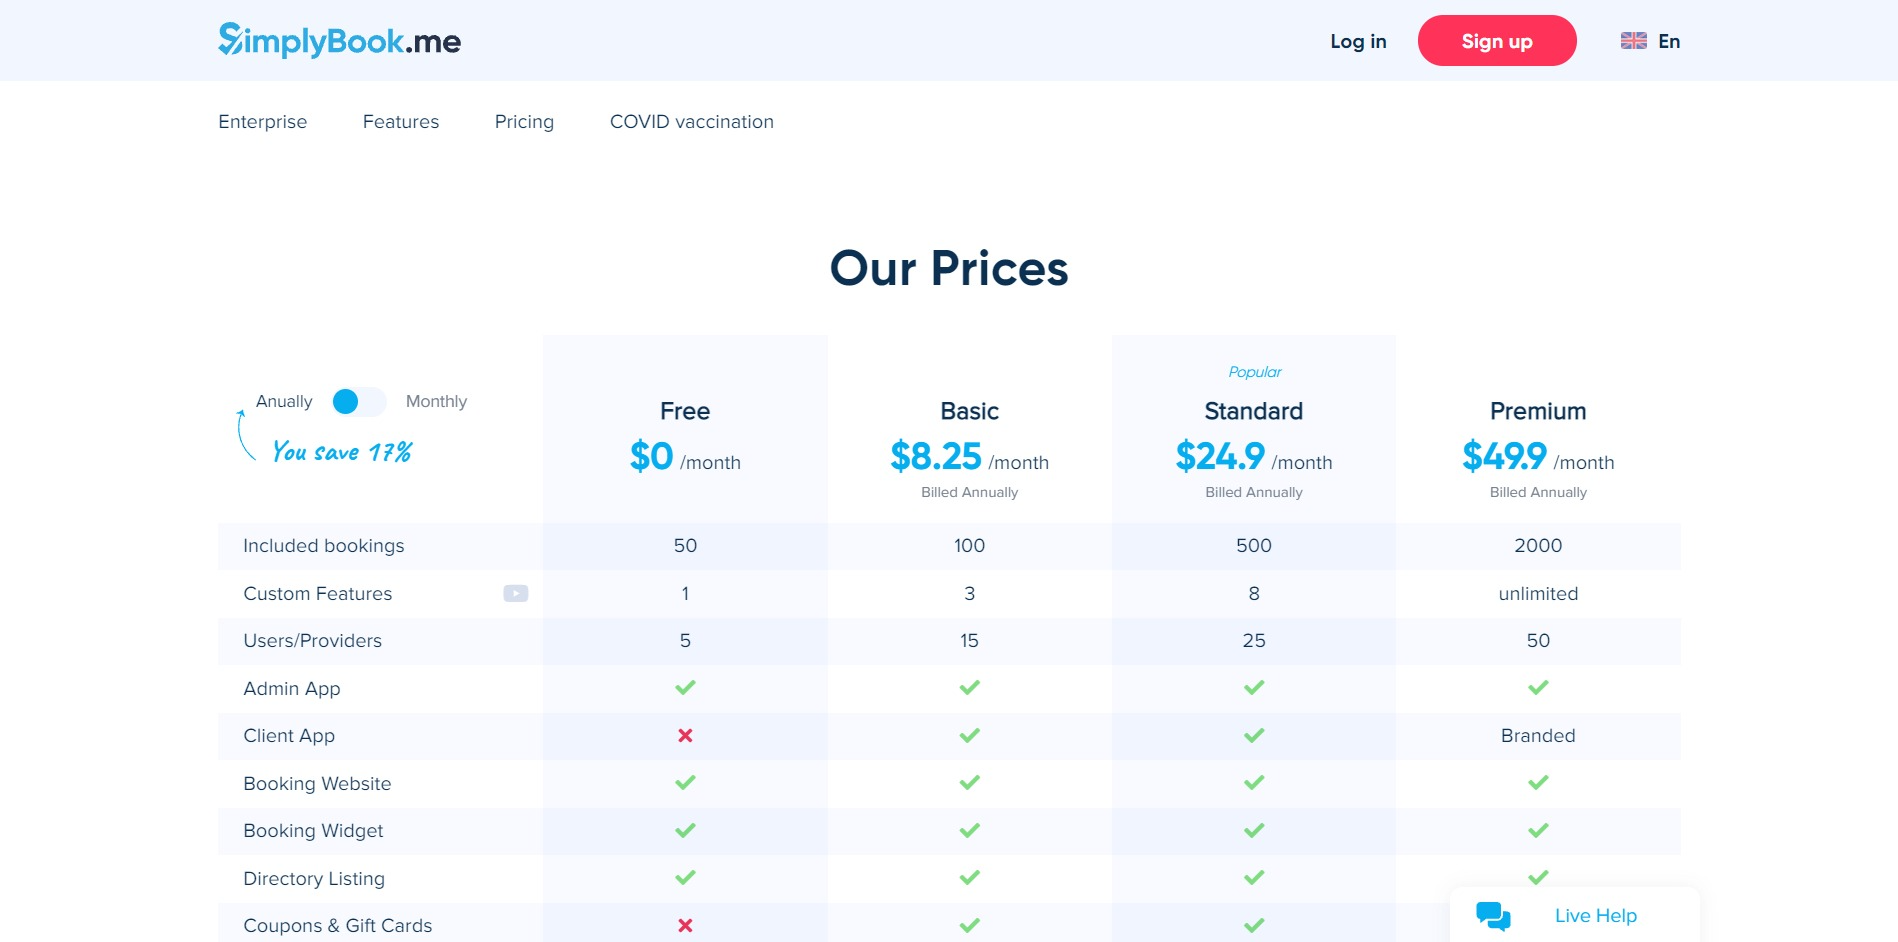 Simplybook.me pricing and plans